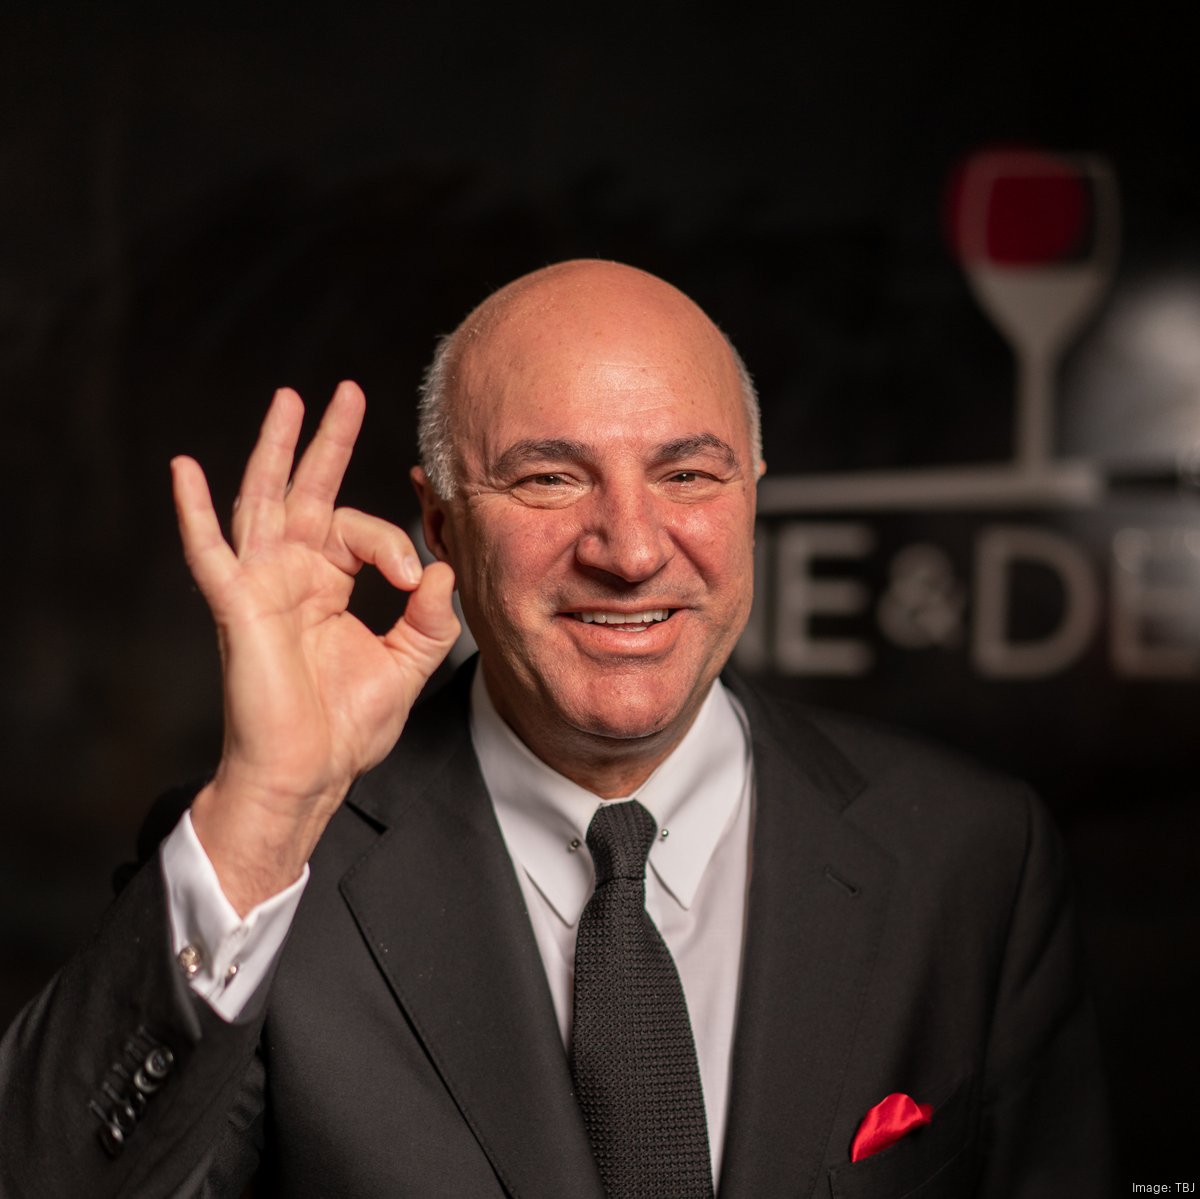 Shark Tank': Kevin O'Leary invests $150,000 in Rounderbum